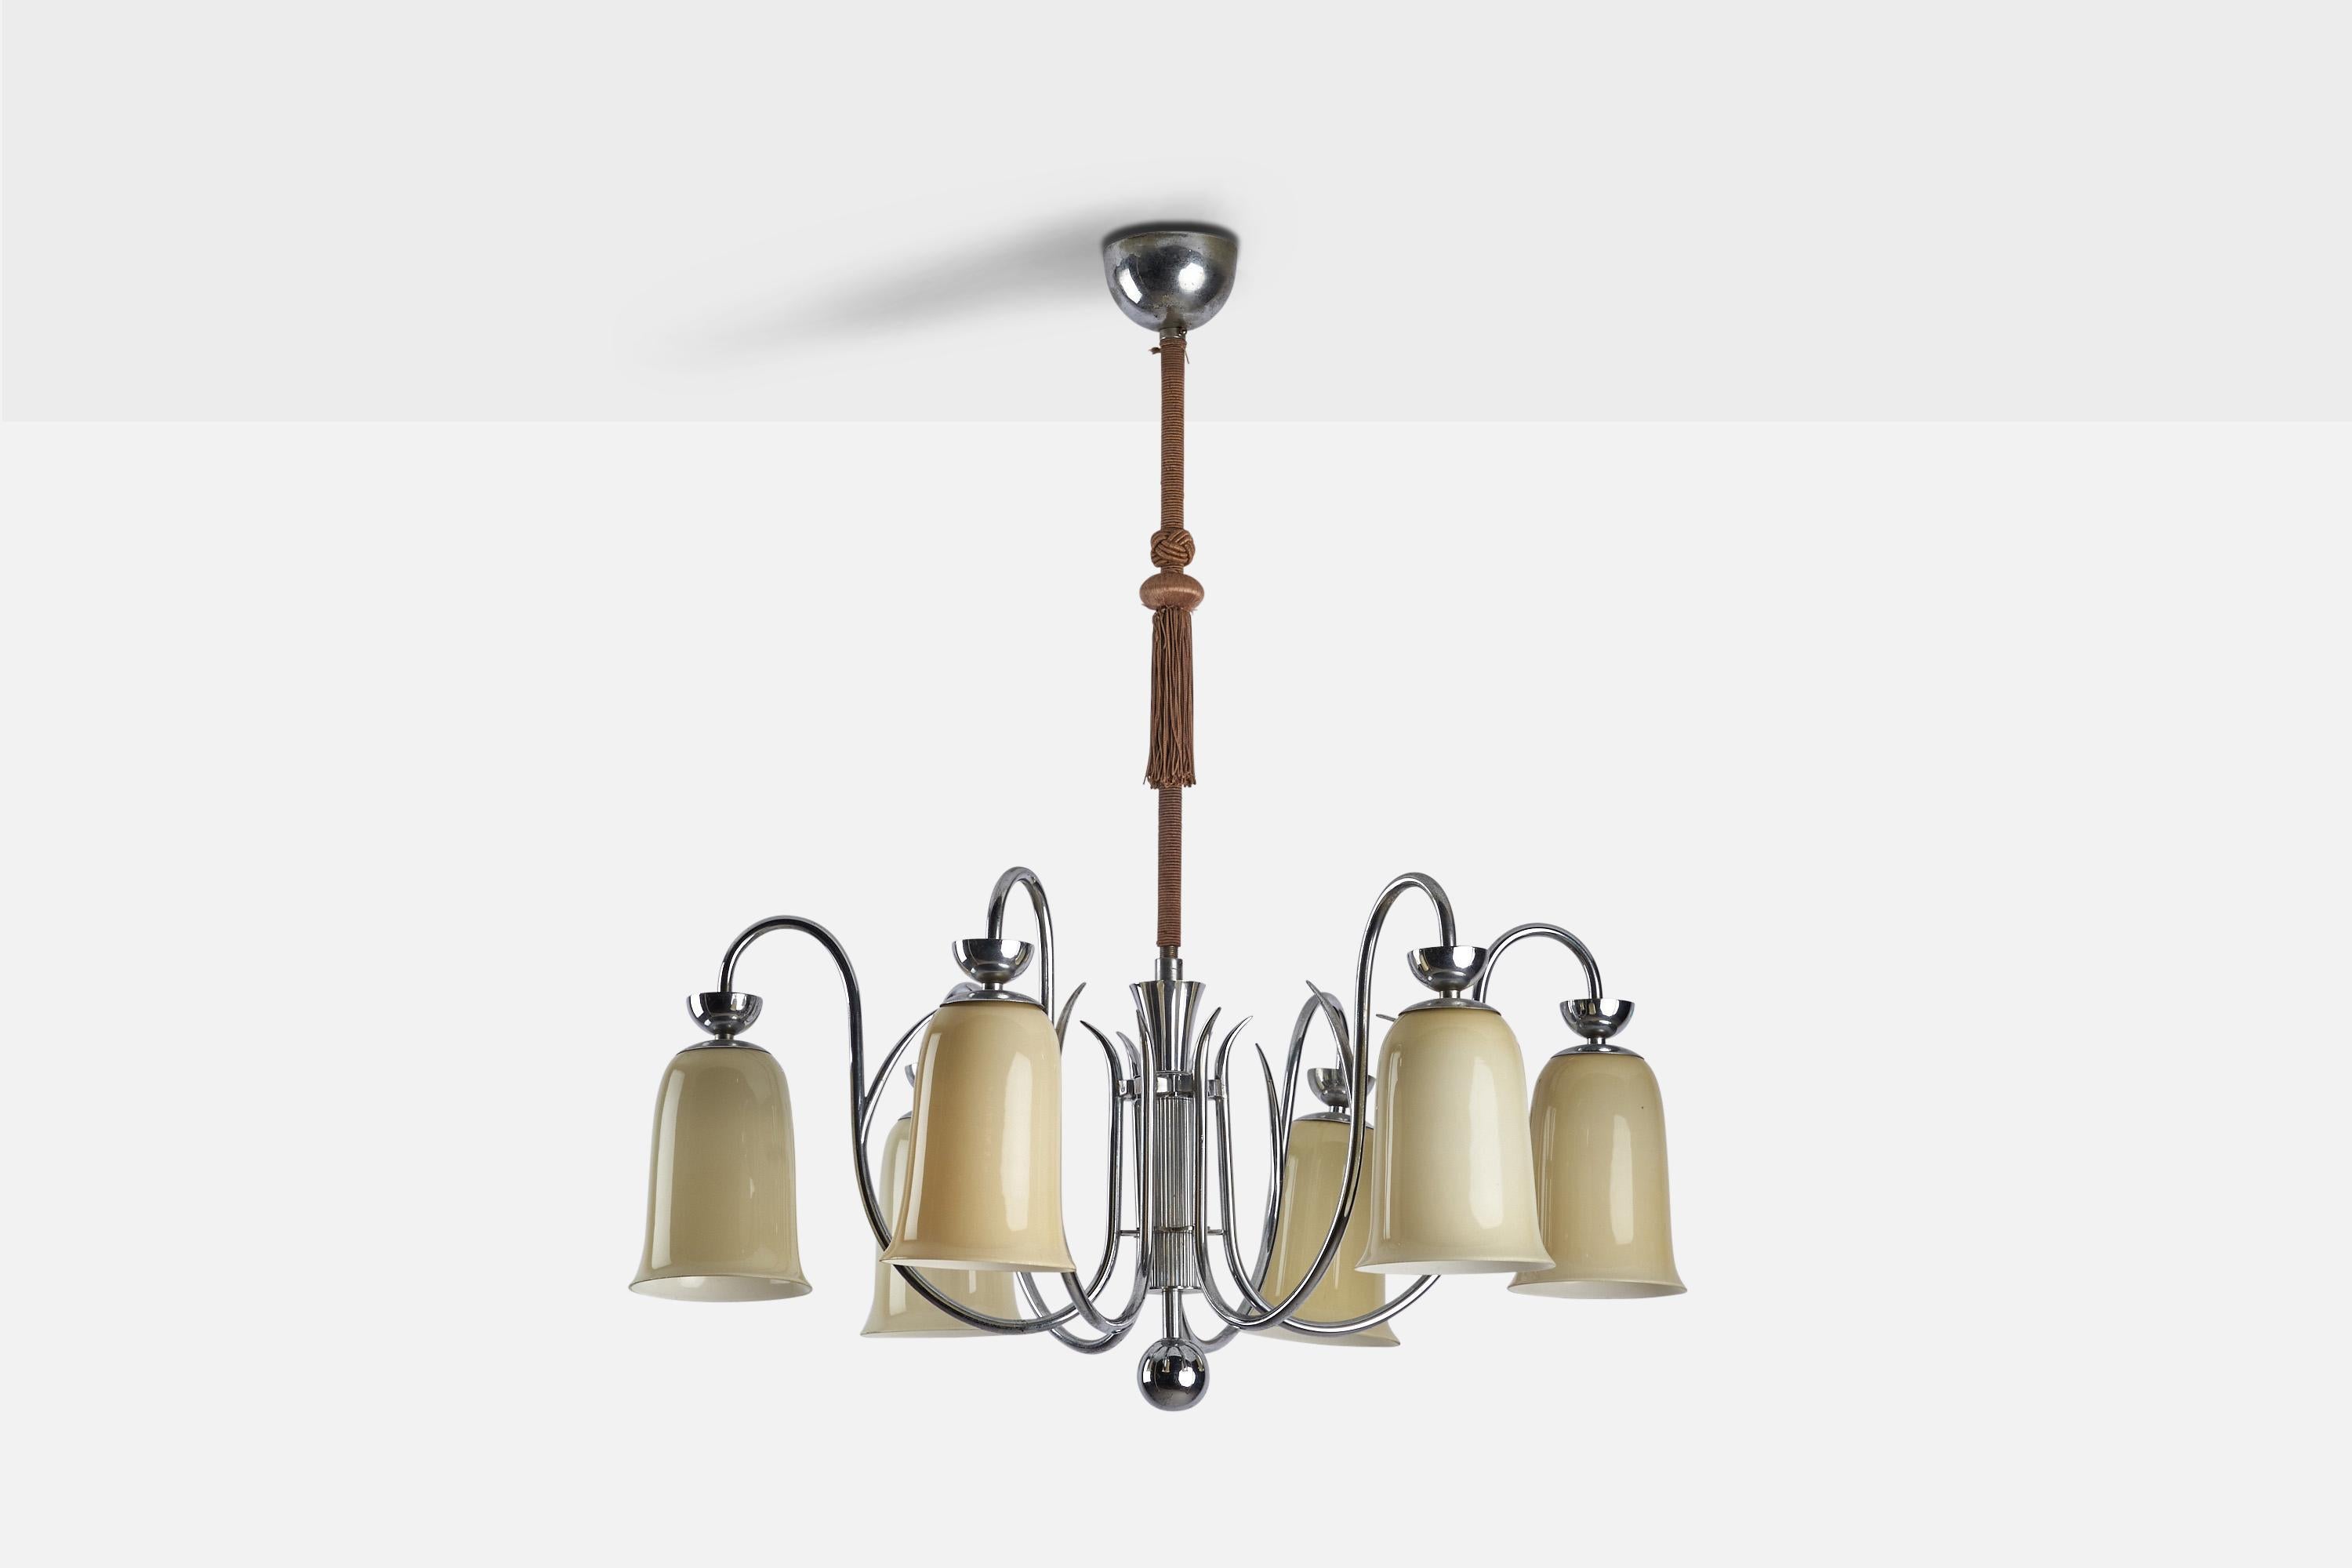 
A steel, beige opaline glass and brown cord chandelier designed and produced in Denmark, 1930s.
Dimensions of canopy (inches) : 2.39” H x 3.65” Diameter
Socket takes standard E-26 bulbs. 6 sockets.There is no maximum wattage stated on the fixture.